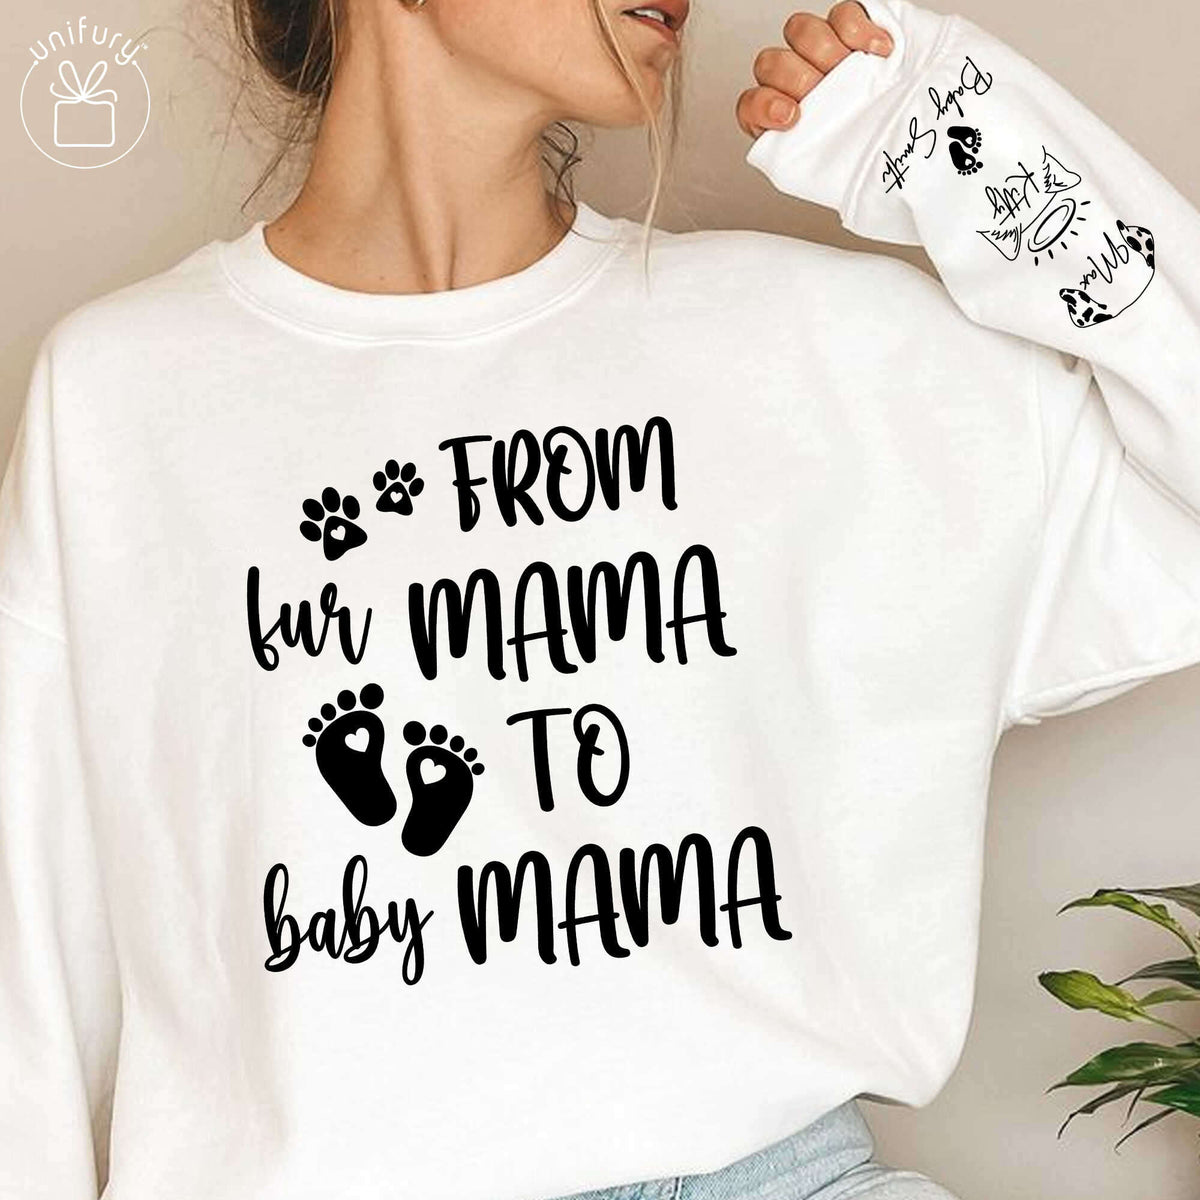 From Fur Mama To Baby Mama Sleeve Printed Standard Sweatshirt For Mom To Be